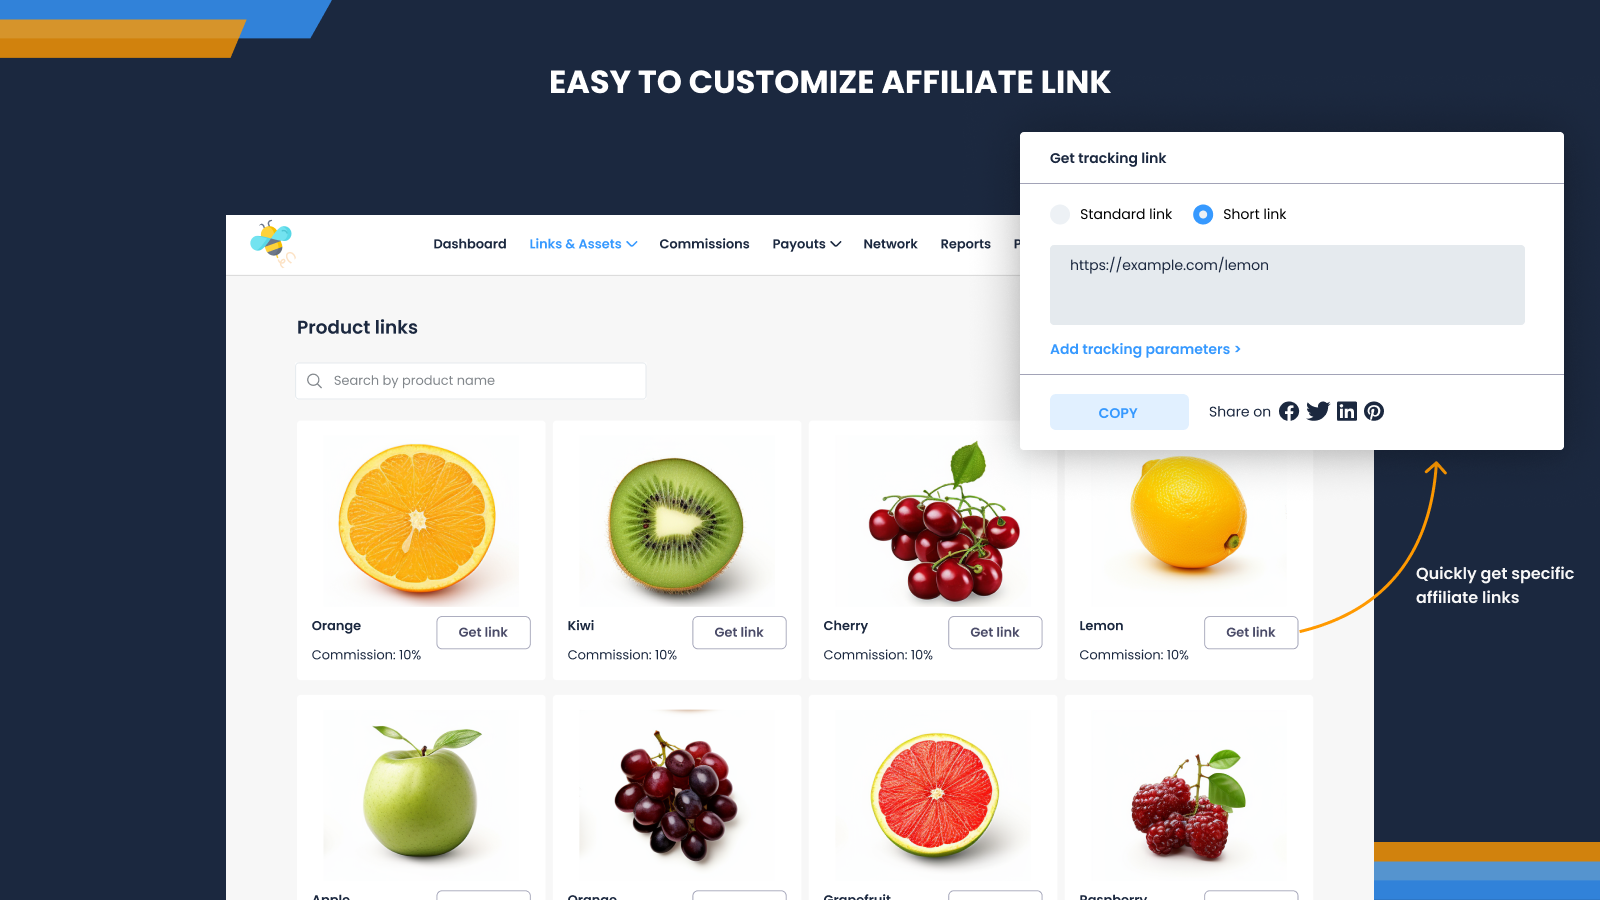 Easily customize affiliate link from affiliate dashboard